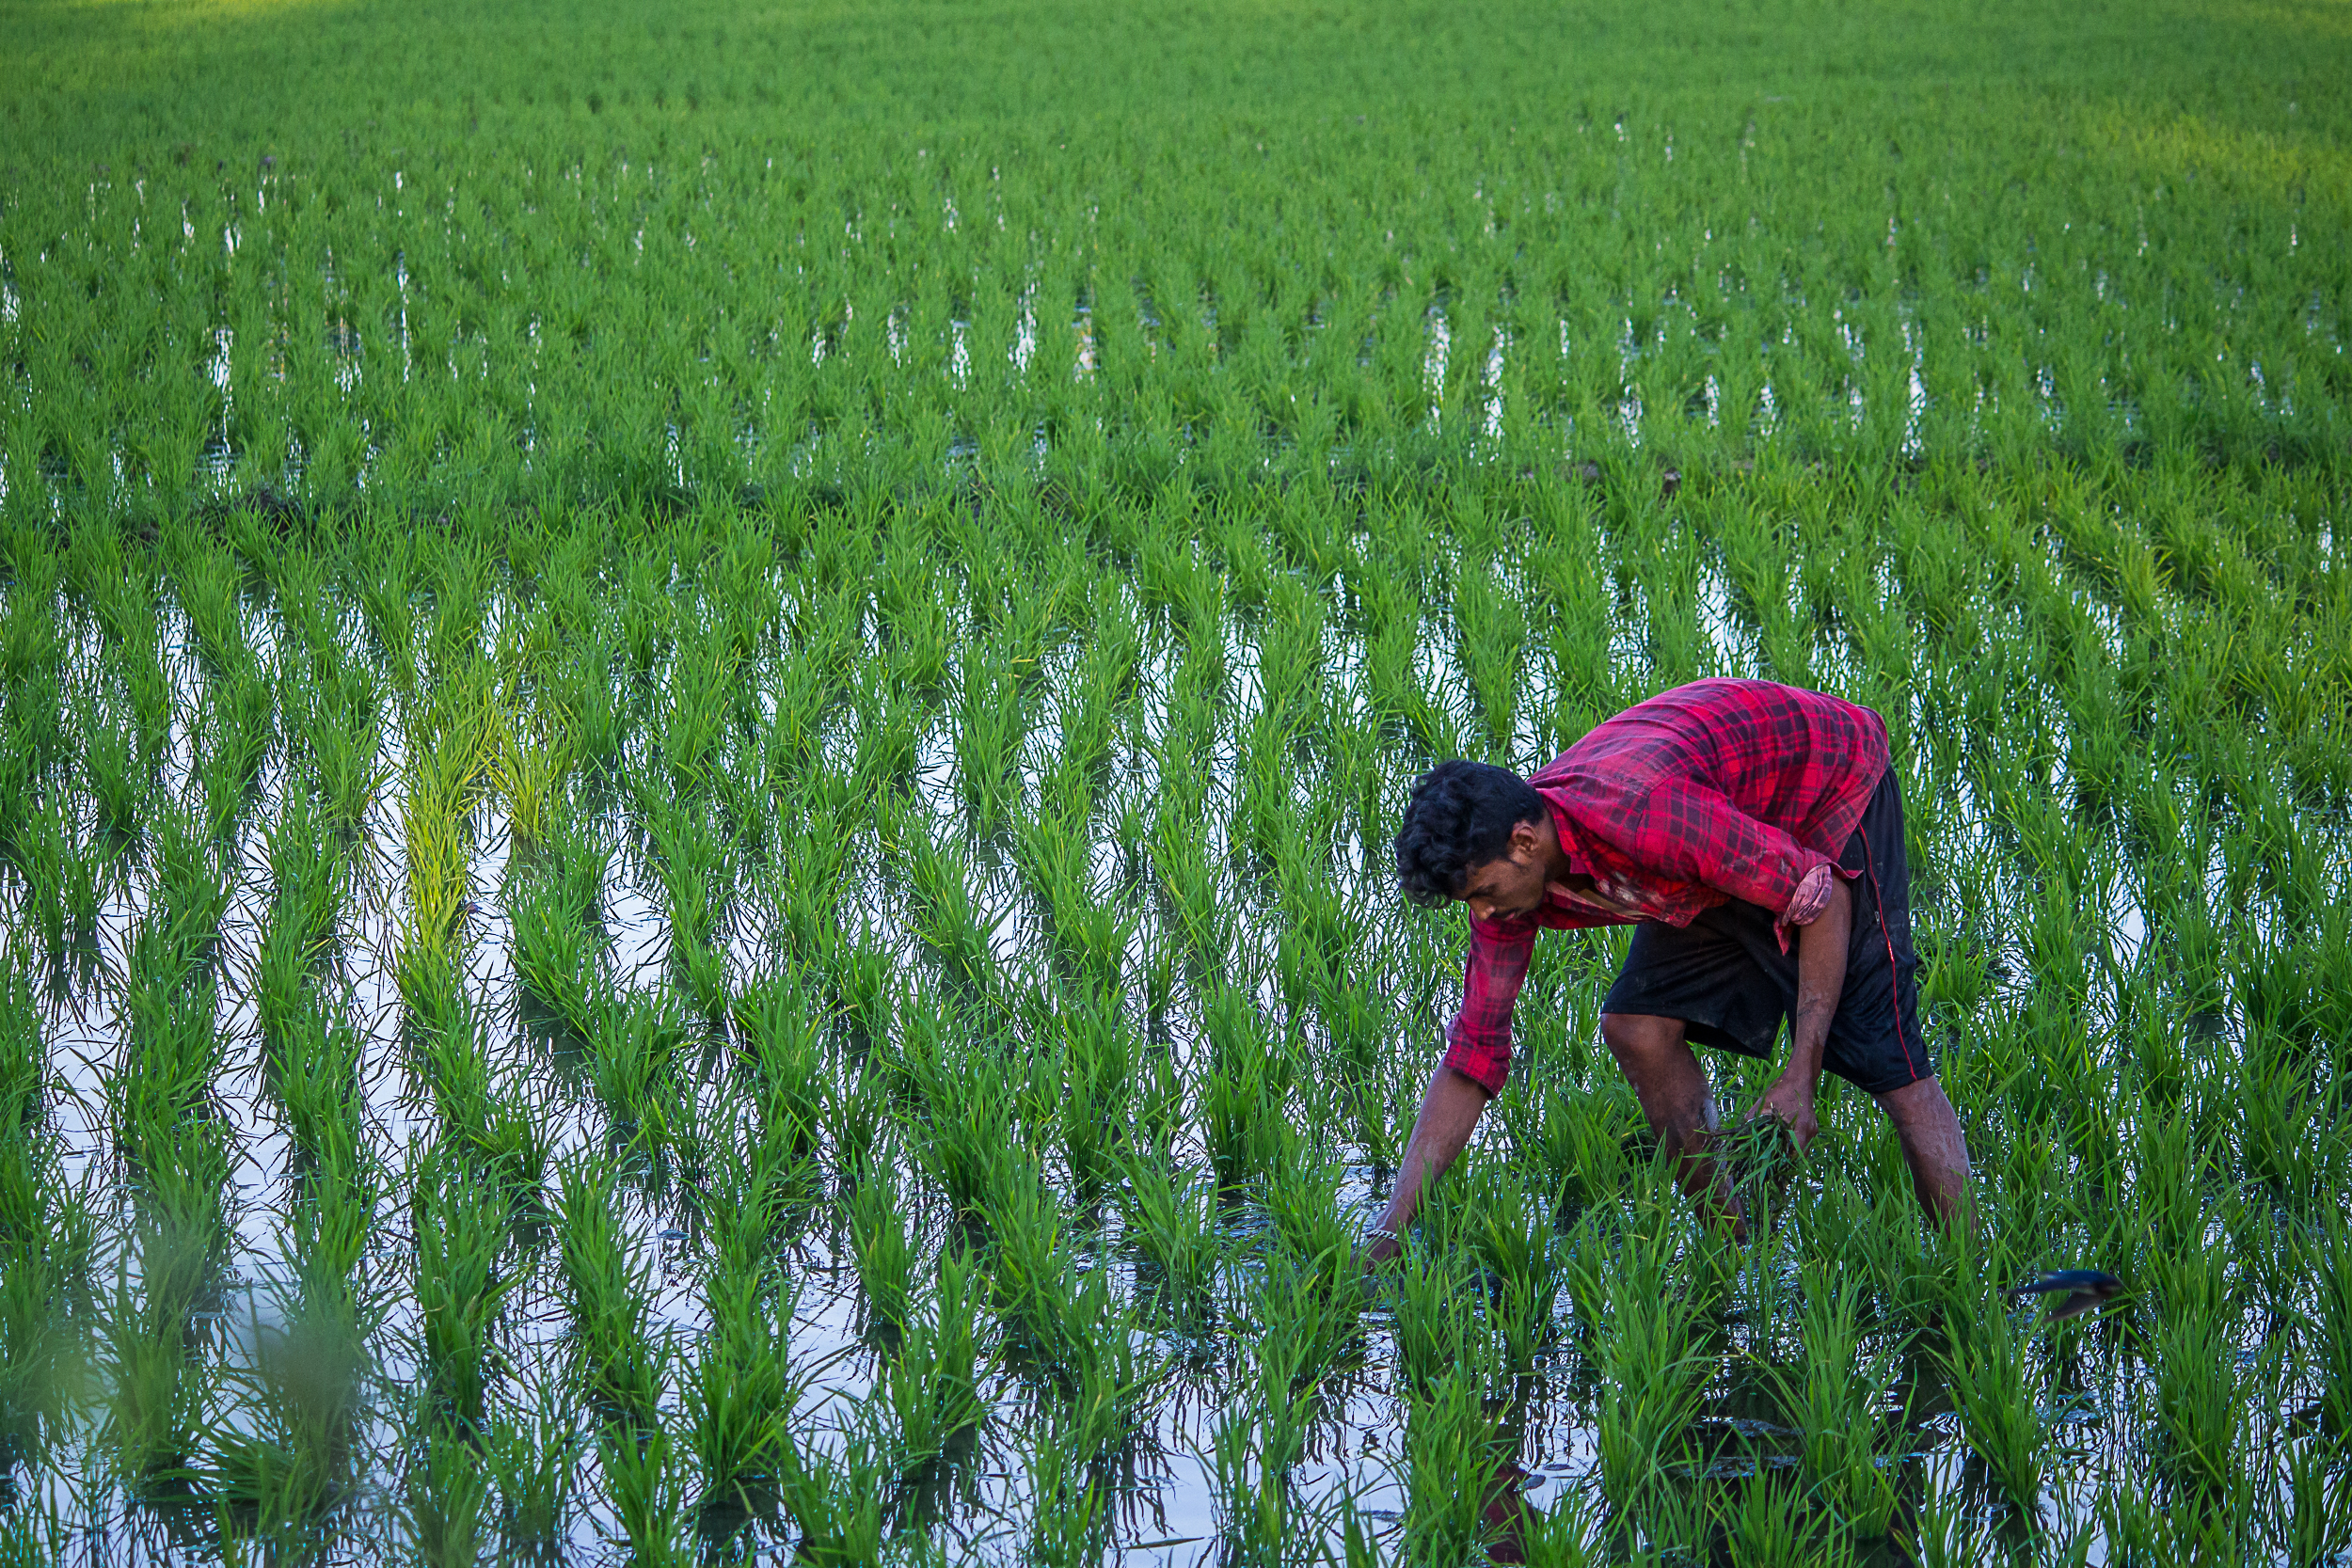 A Farmer working in the Paddy Field